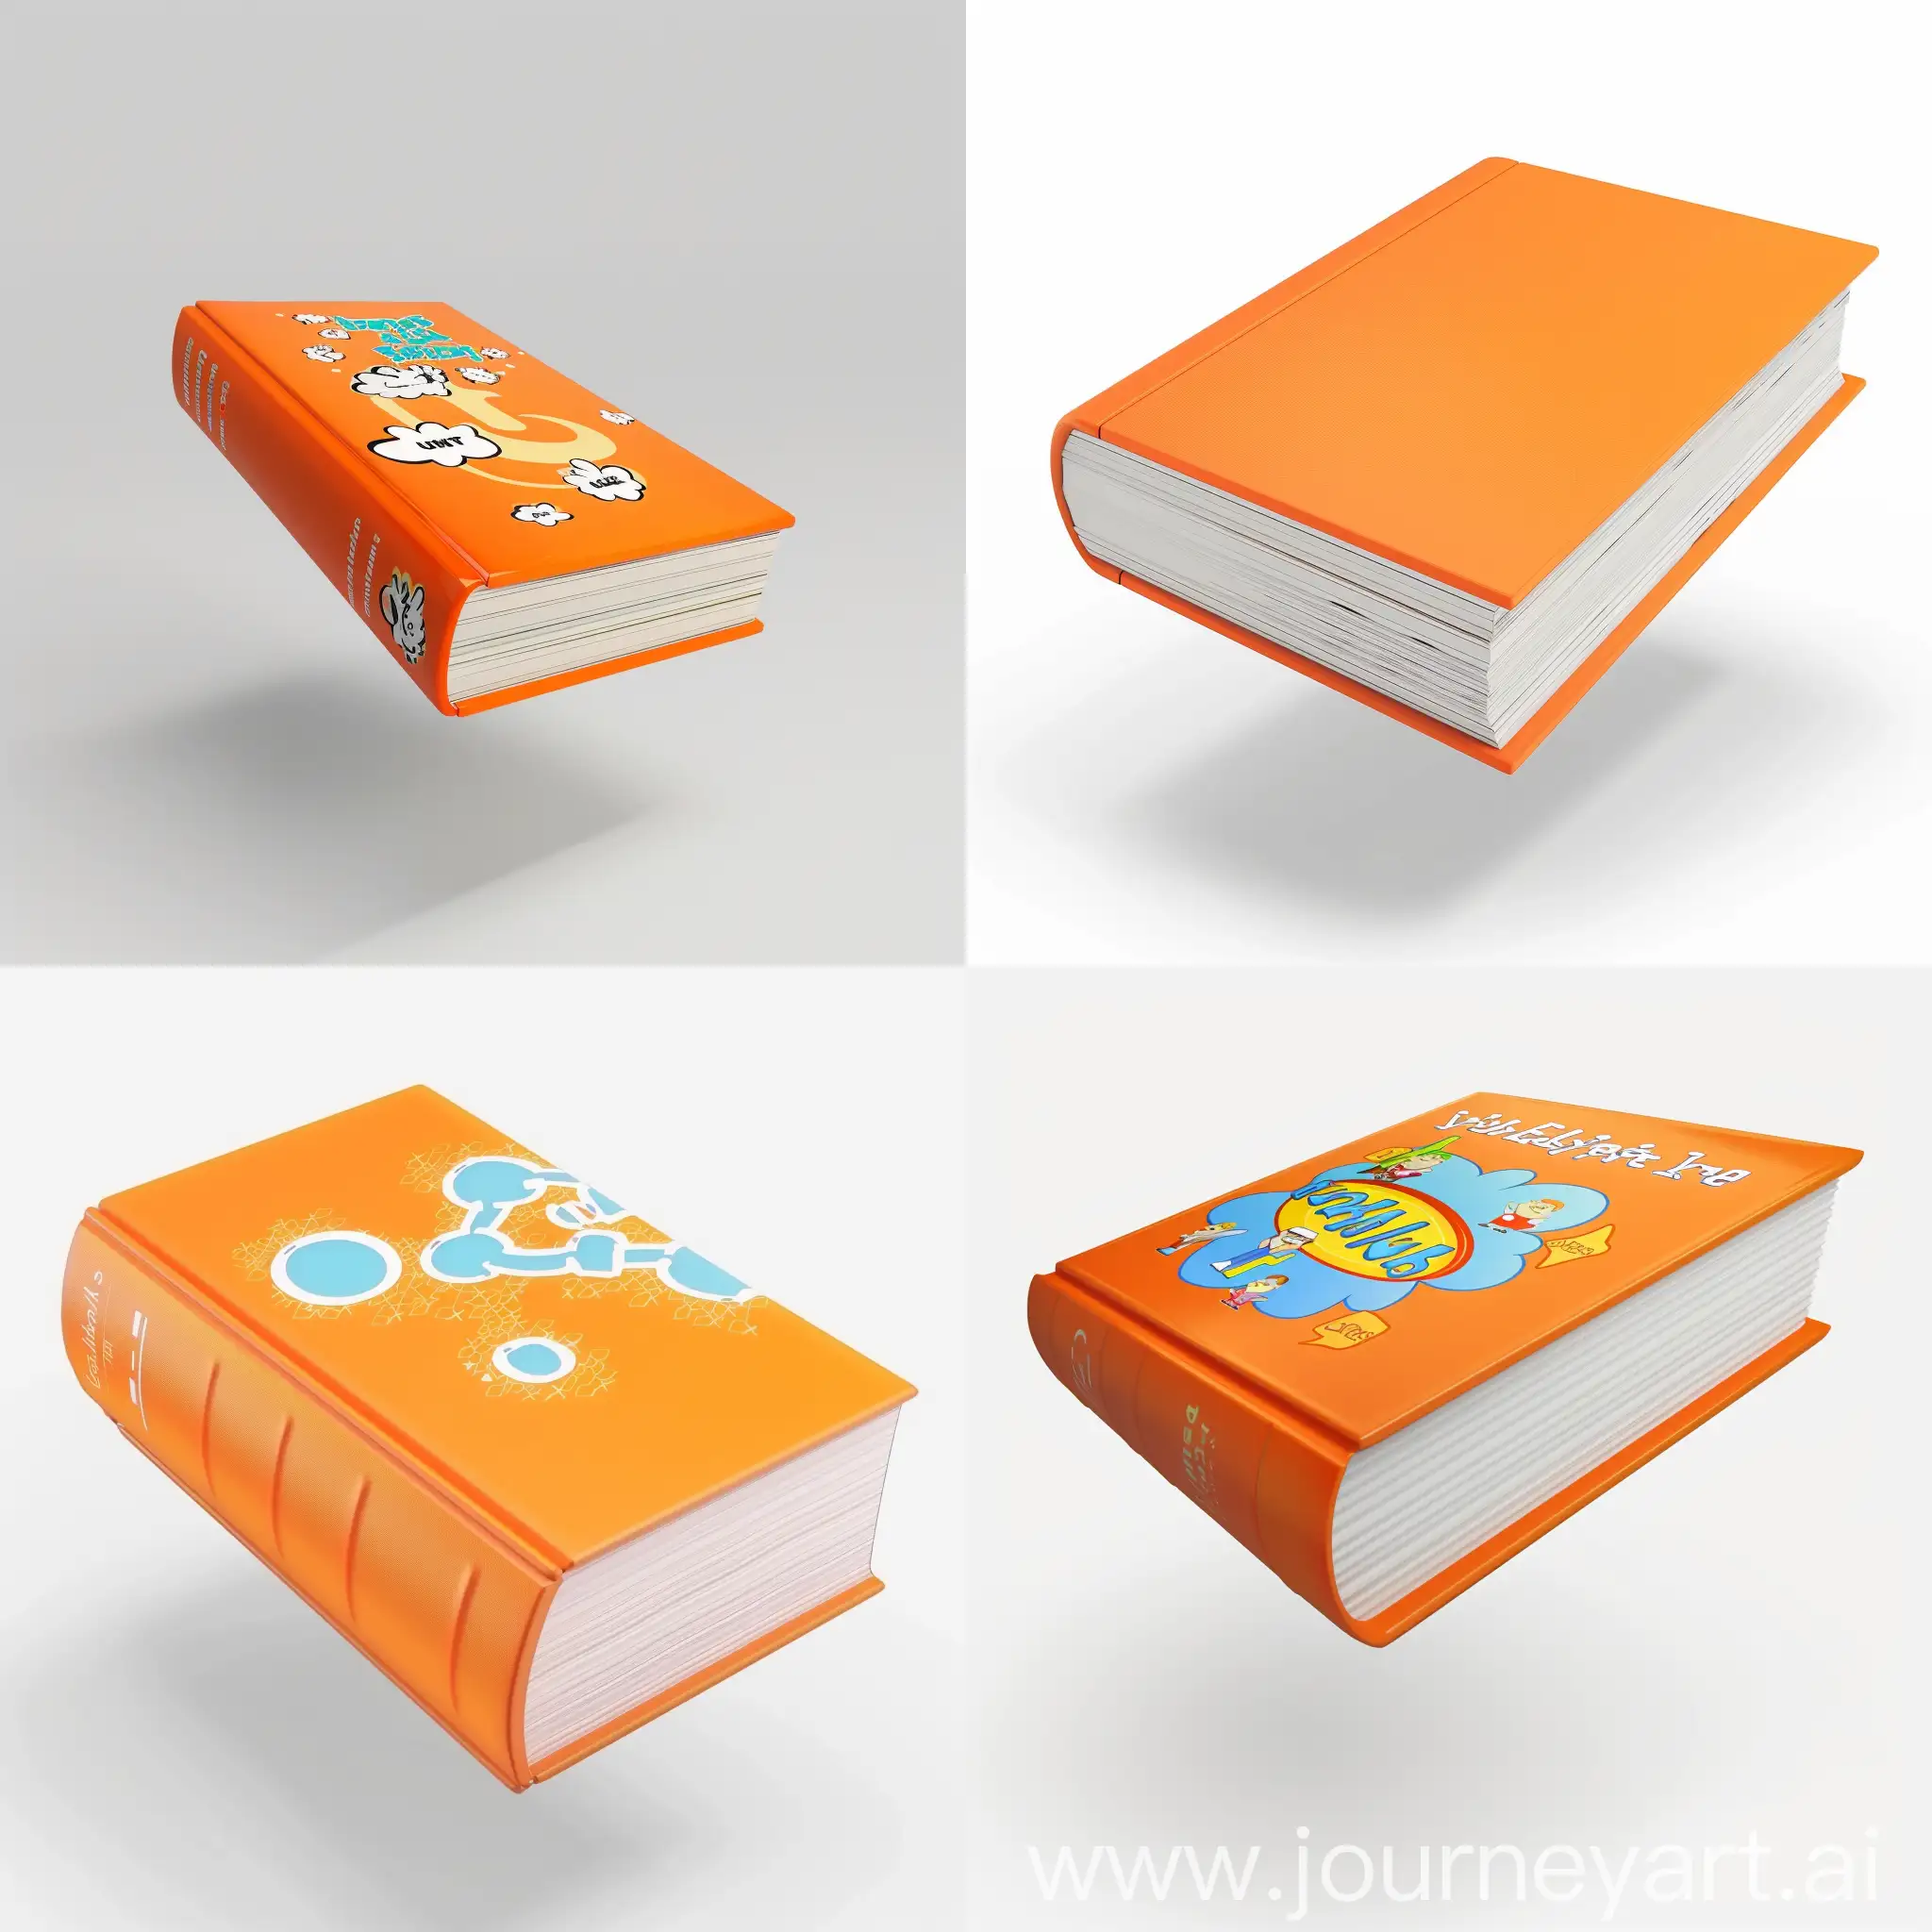 Floating-Cartoon-Style-Book-with-Orange-Cover-on-Clean-White-Background